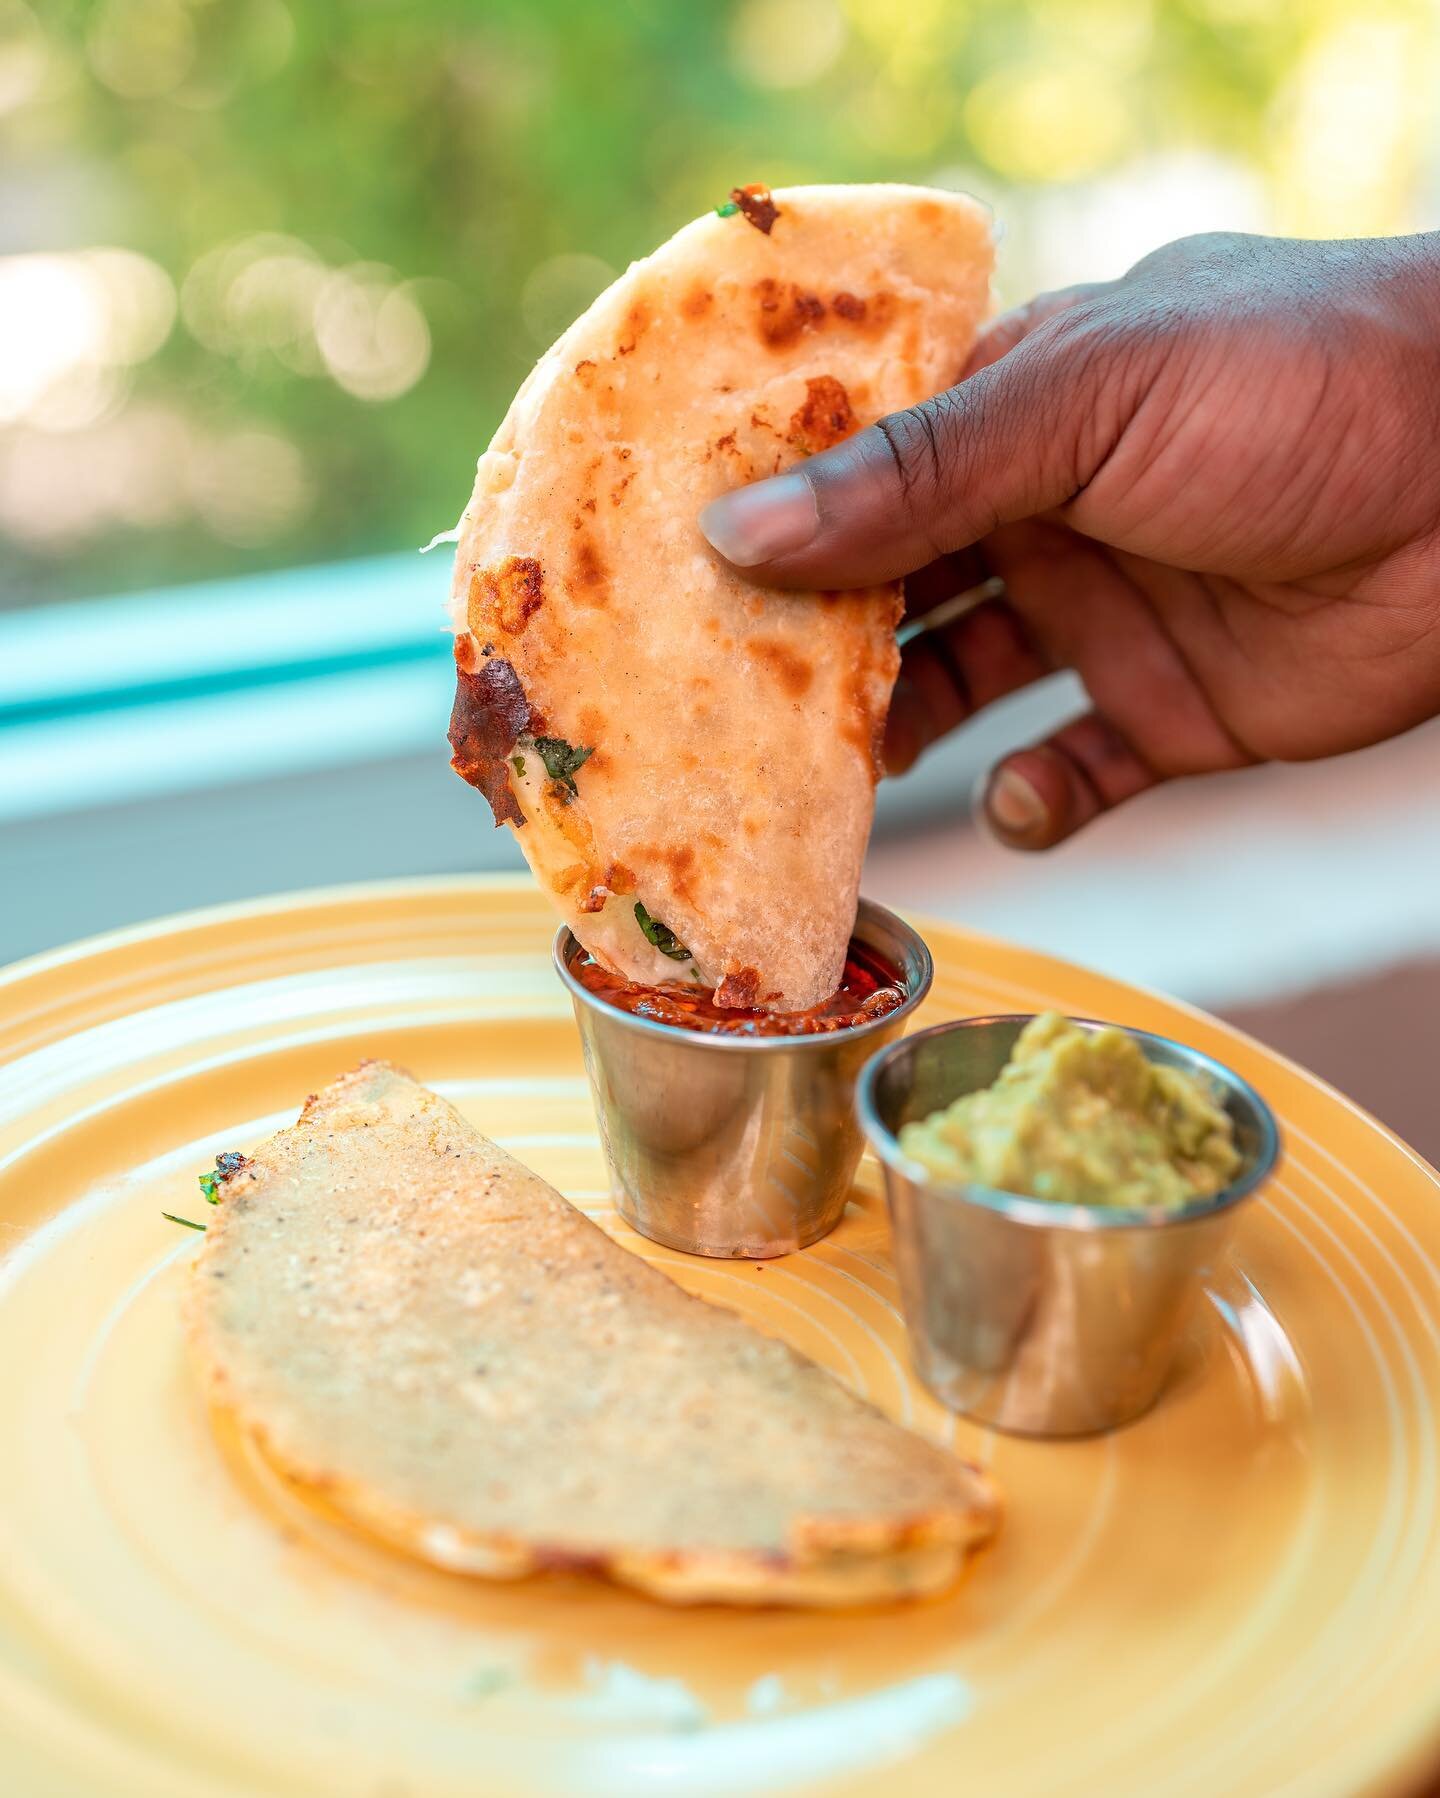 If you miss the quesadillas, don't worry they're still here! They're no longer listed on our menu, but we&rsquo;re always happy to make them for you.

Pictured: Duo of Quesadillas
Queso Oaxaca, queso Chihuahua, and cilantro pressed in a corn tortilla